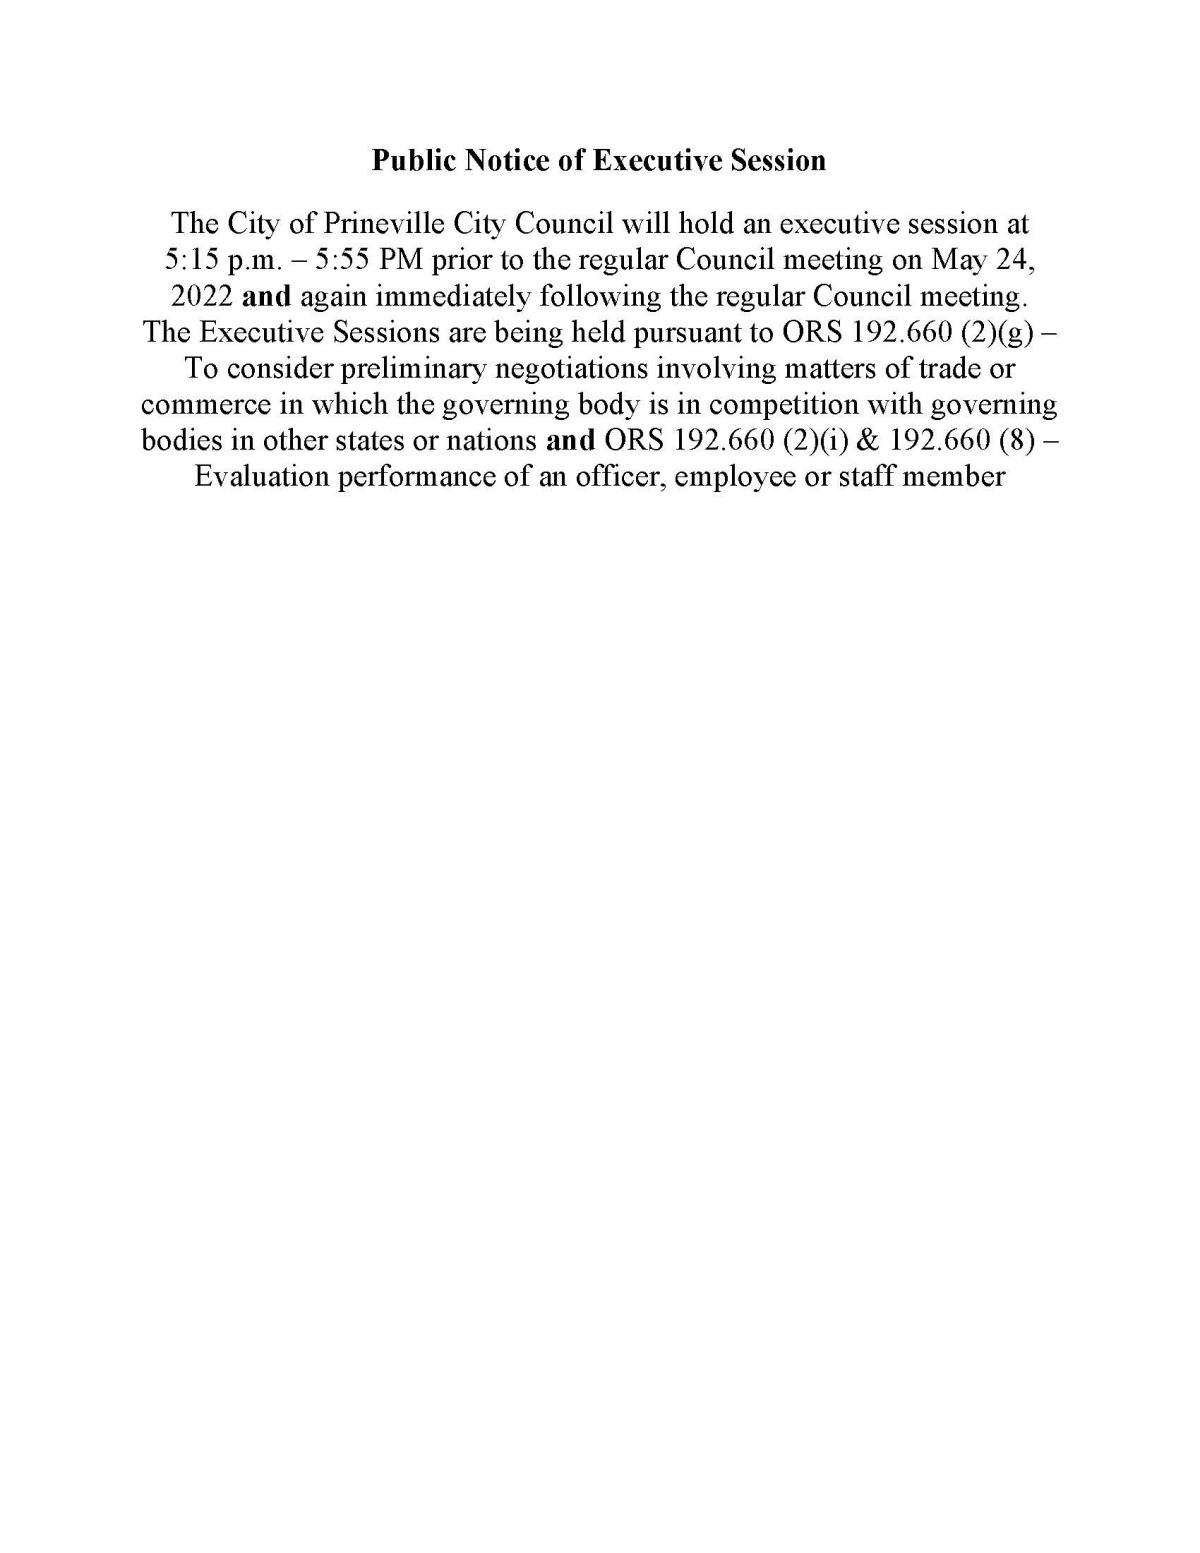 Notice of Executive Session 5-24-2022